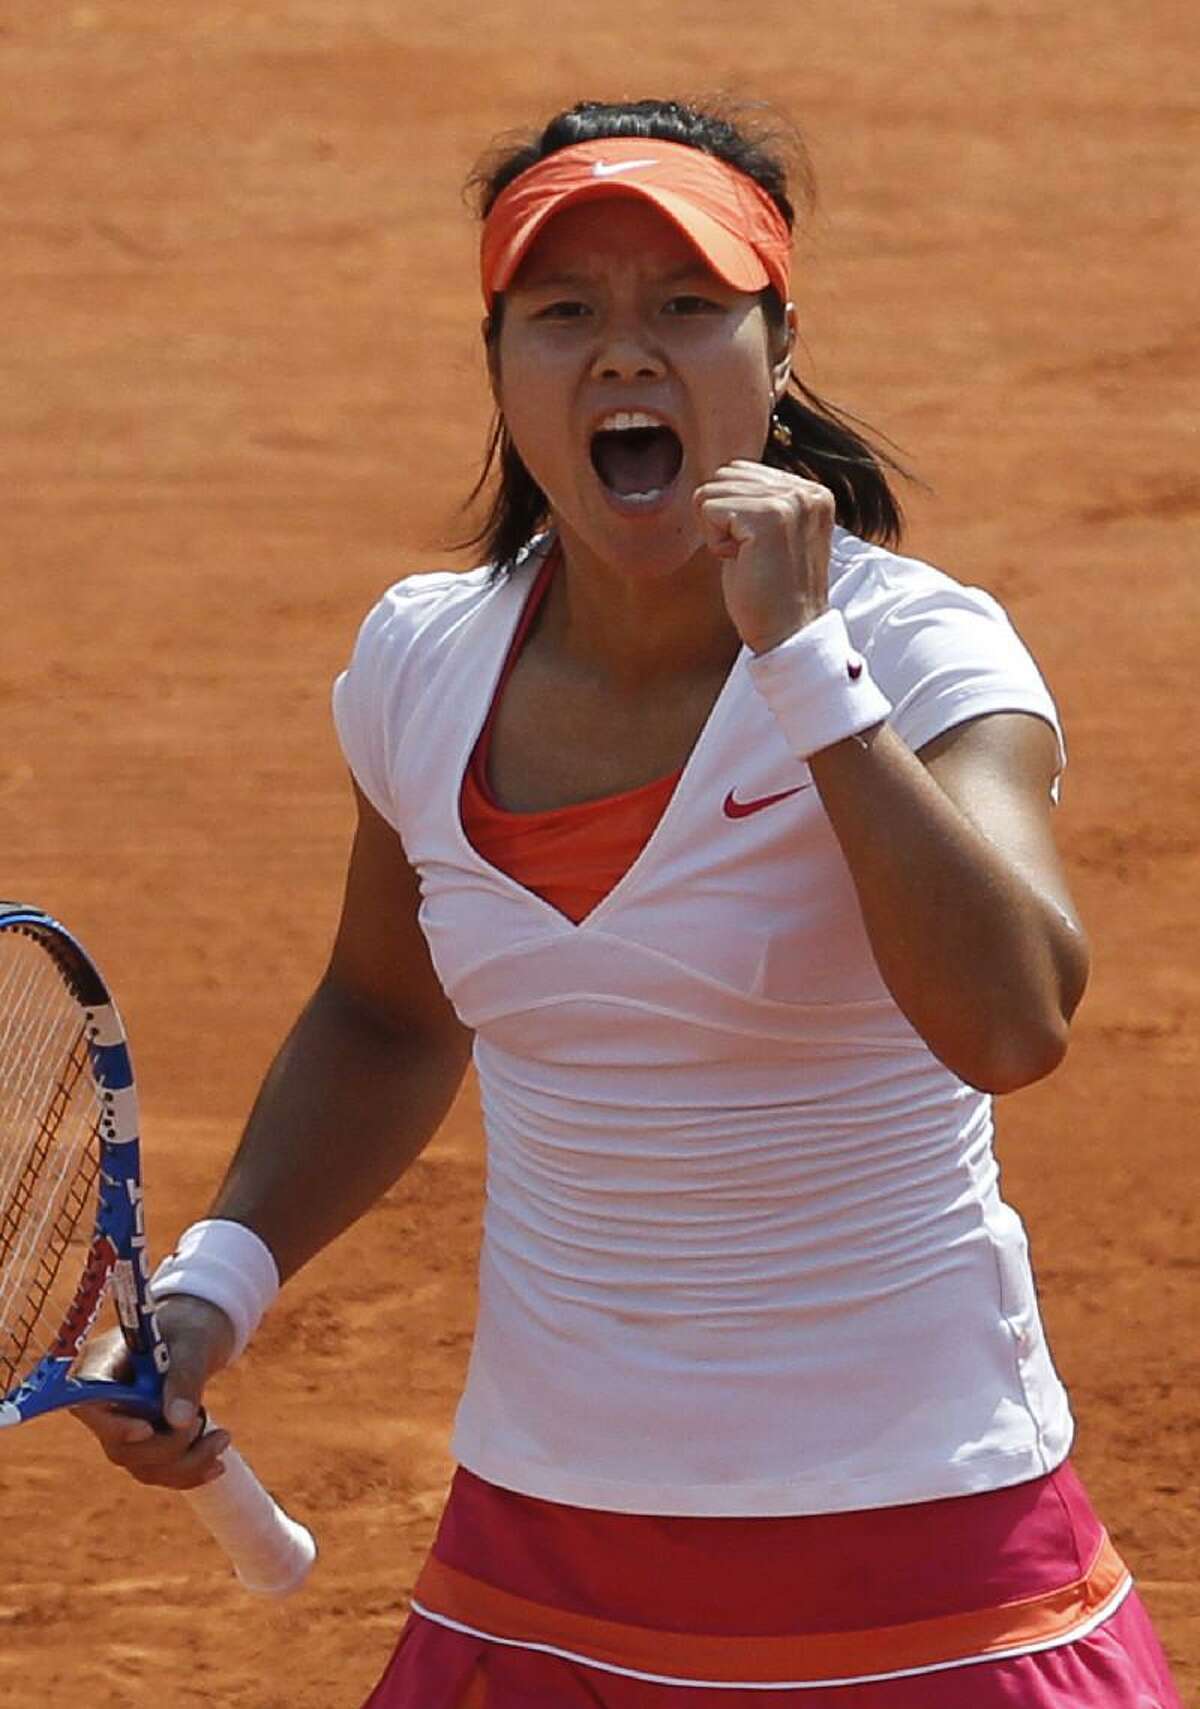 ASSOCIATED PRESS China's Li Na reacts as she plays Italy's Francesca Schiavone during their women's final match for the French Open tennis tournament at the Roland Garros stadium, Saturday in Paris.